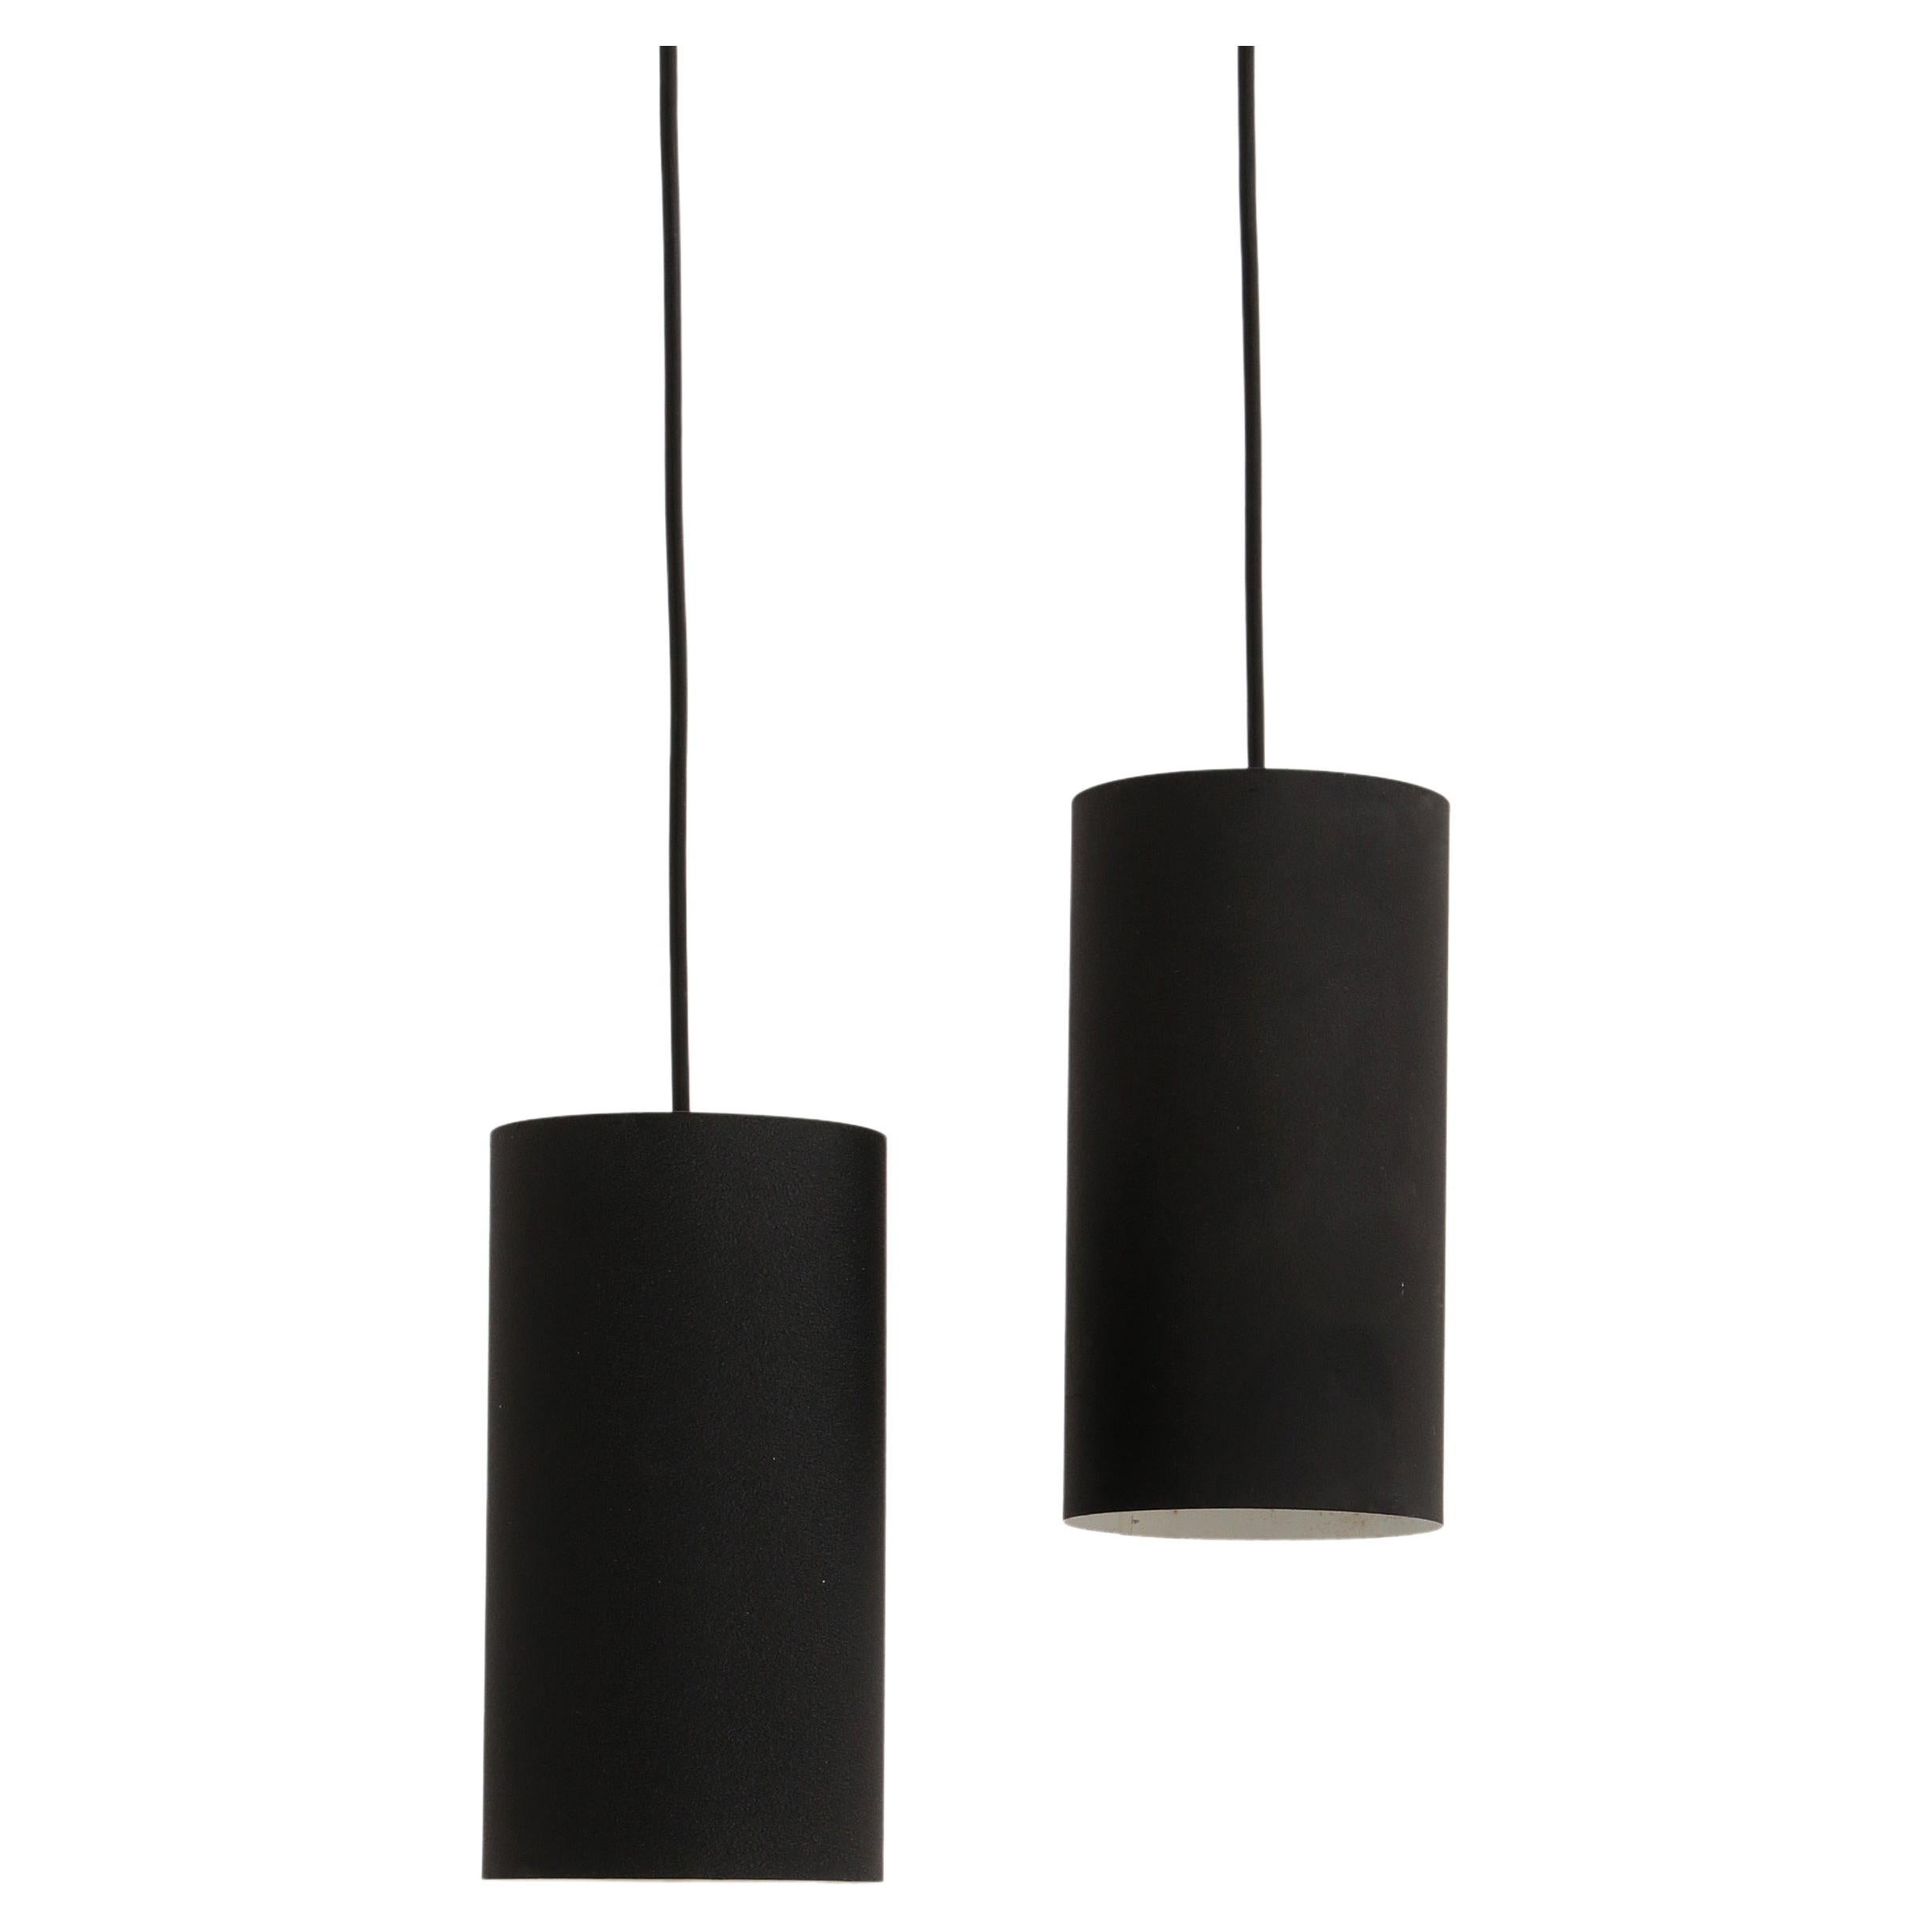 Philips Set of 2 Hanging Lamps Model Nt 48 Design by Argenta, 1960